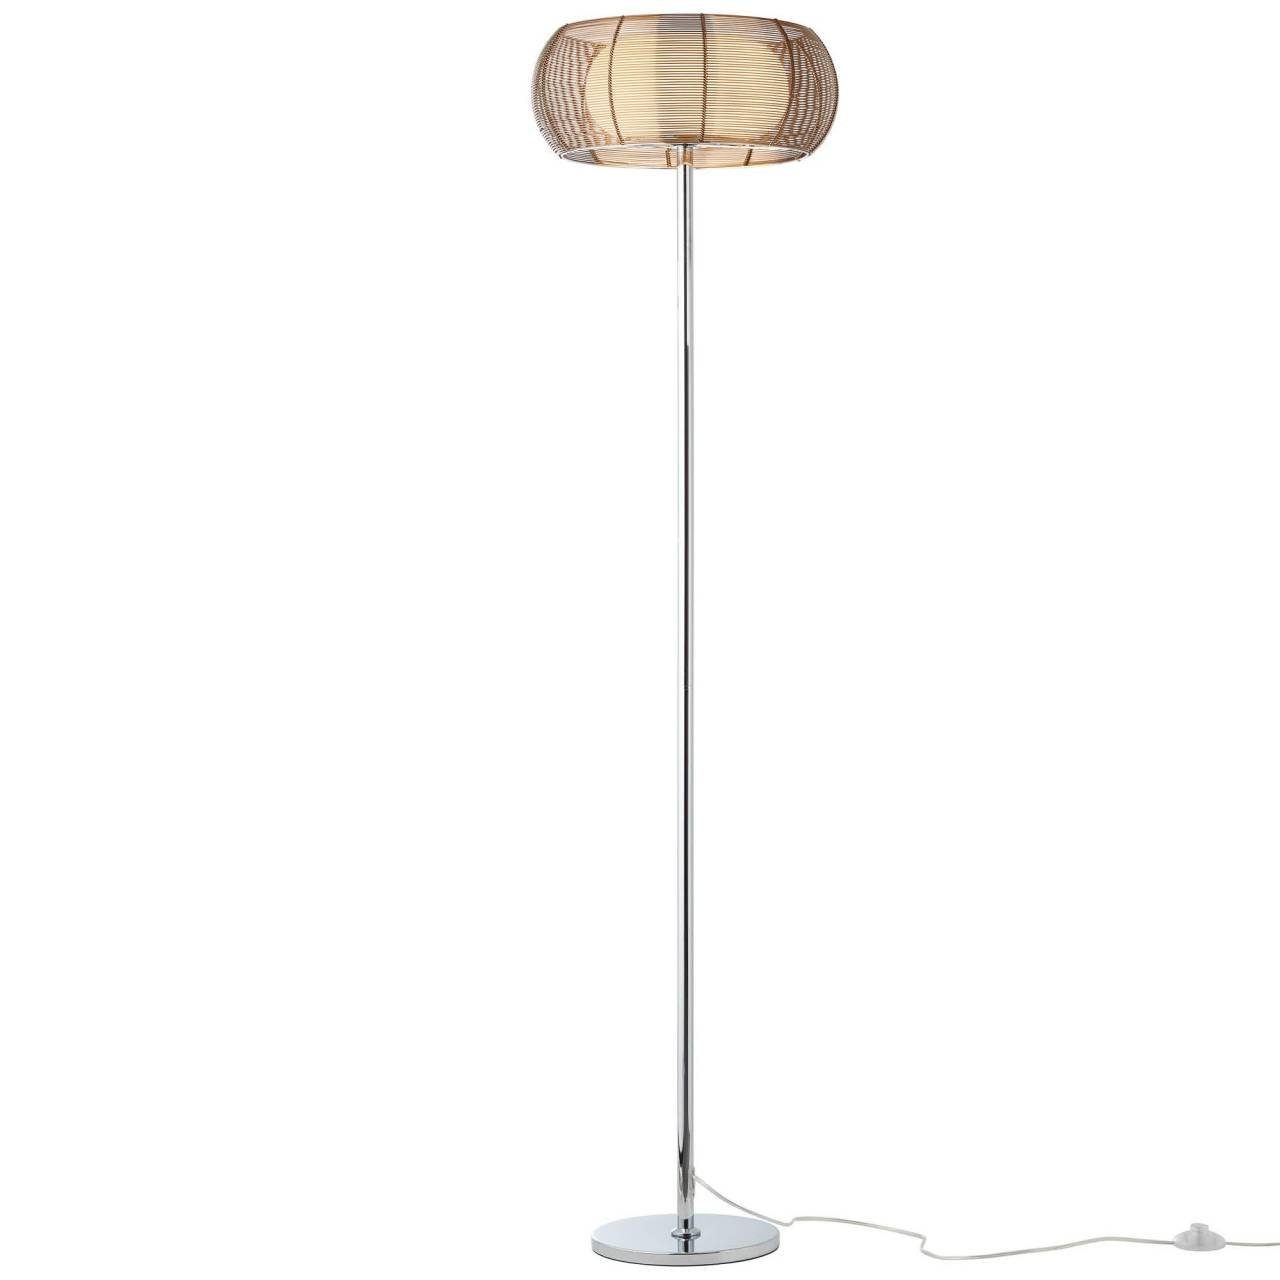 Brilliant Stehlampe Relax, Lampe Relax Standleuchte 2flg bronze/chrom 2x A60, E27, 30W, g.f. No